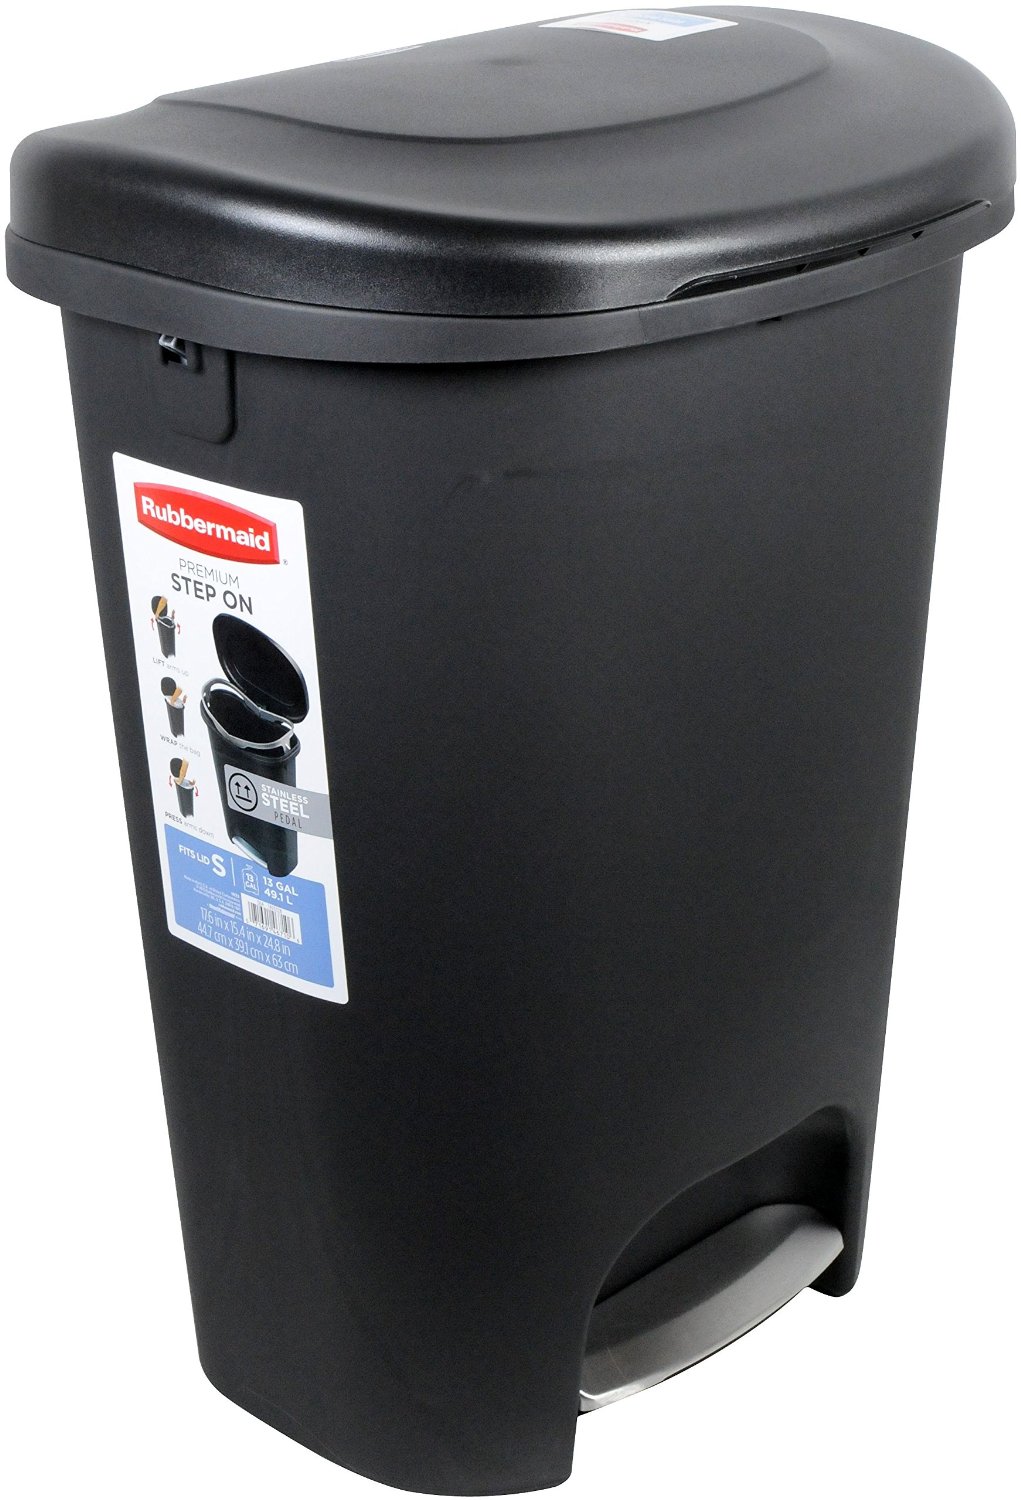 13-Gallon Rubbermaid Step-On Wastebasket – Only $19.97!